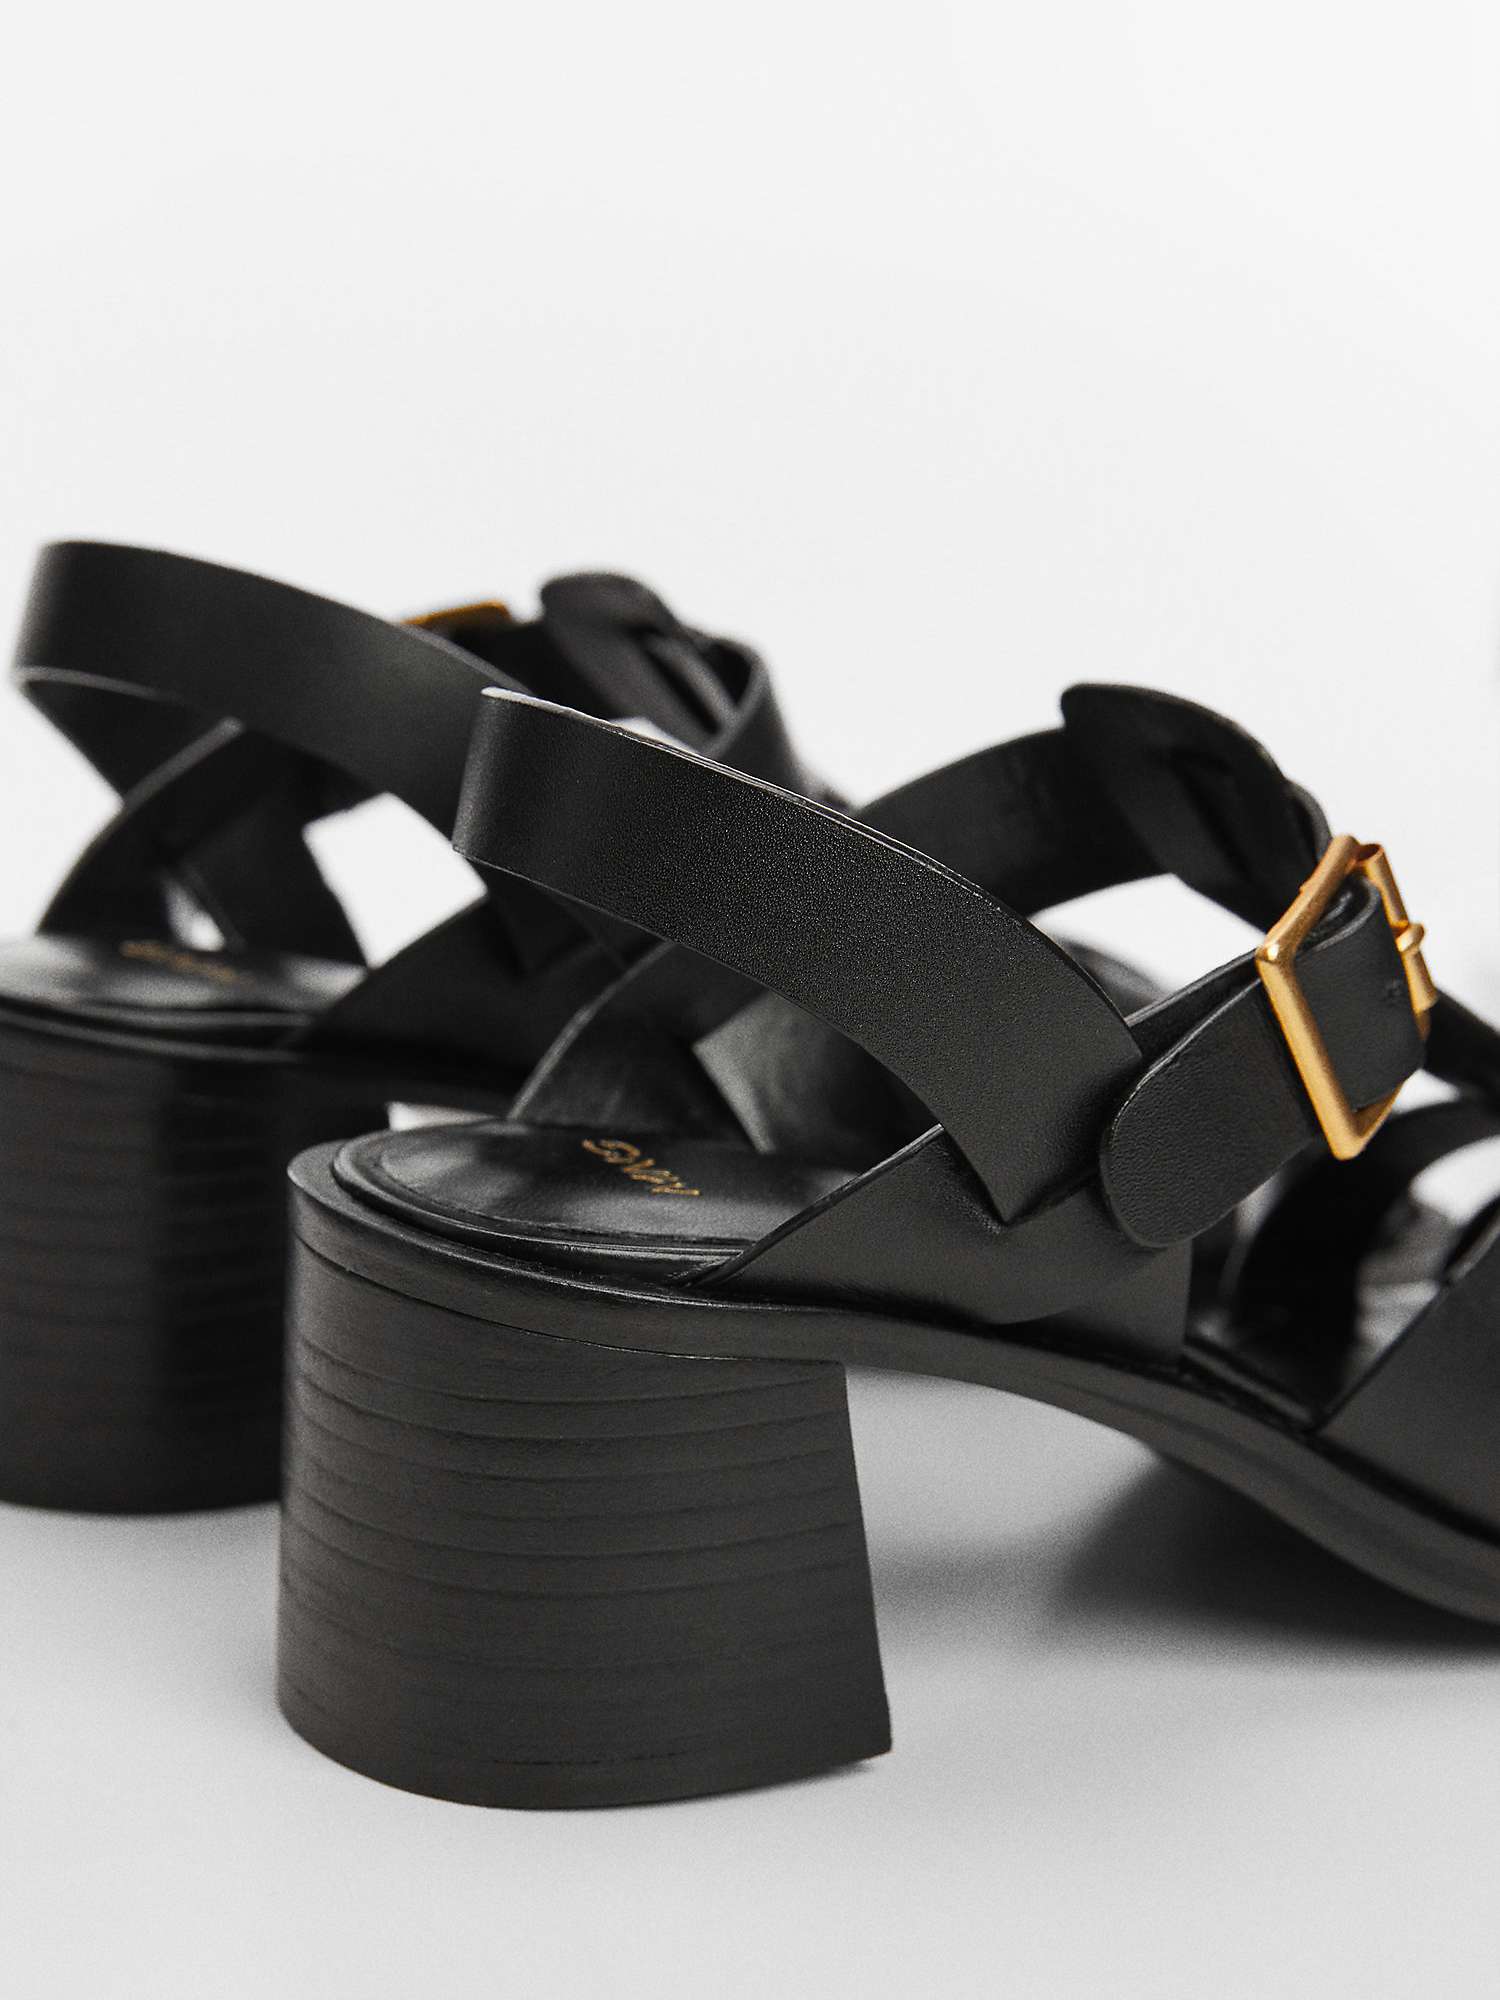 Buy Mango Fisher Leather Jelly Shoes, Black Online at johnlewis.com